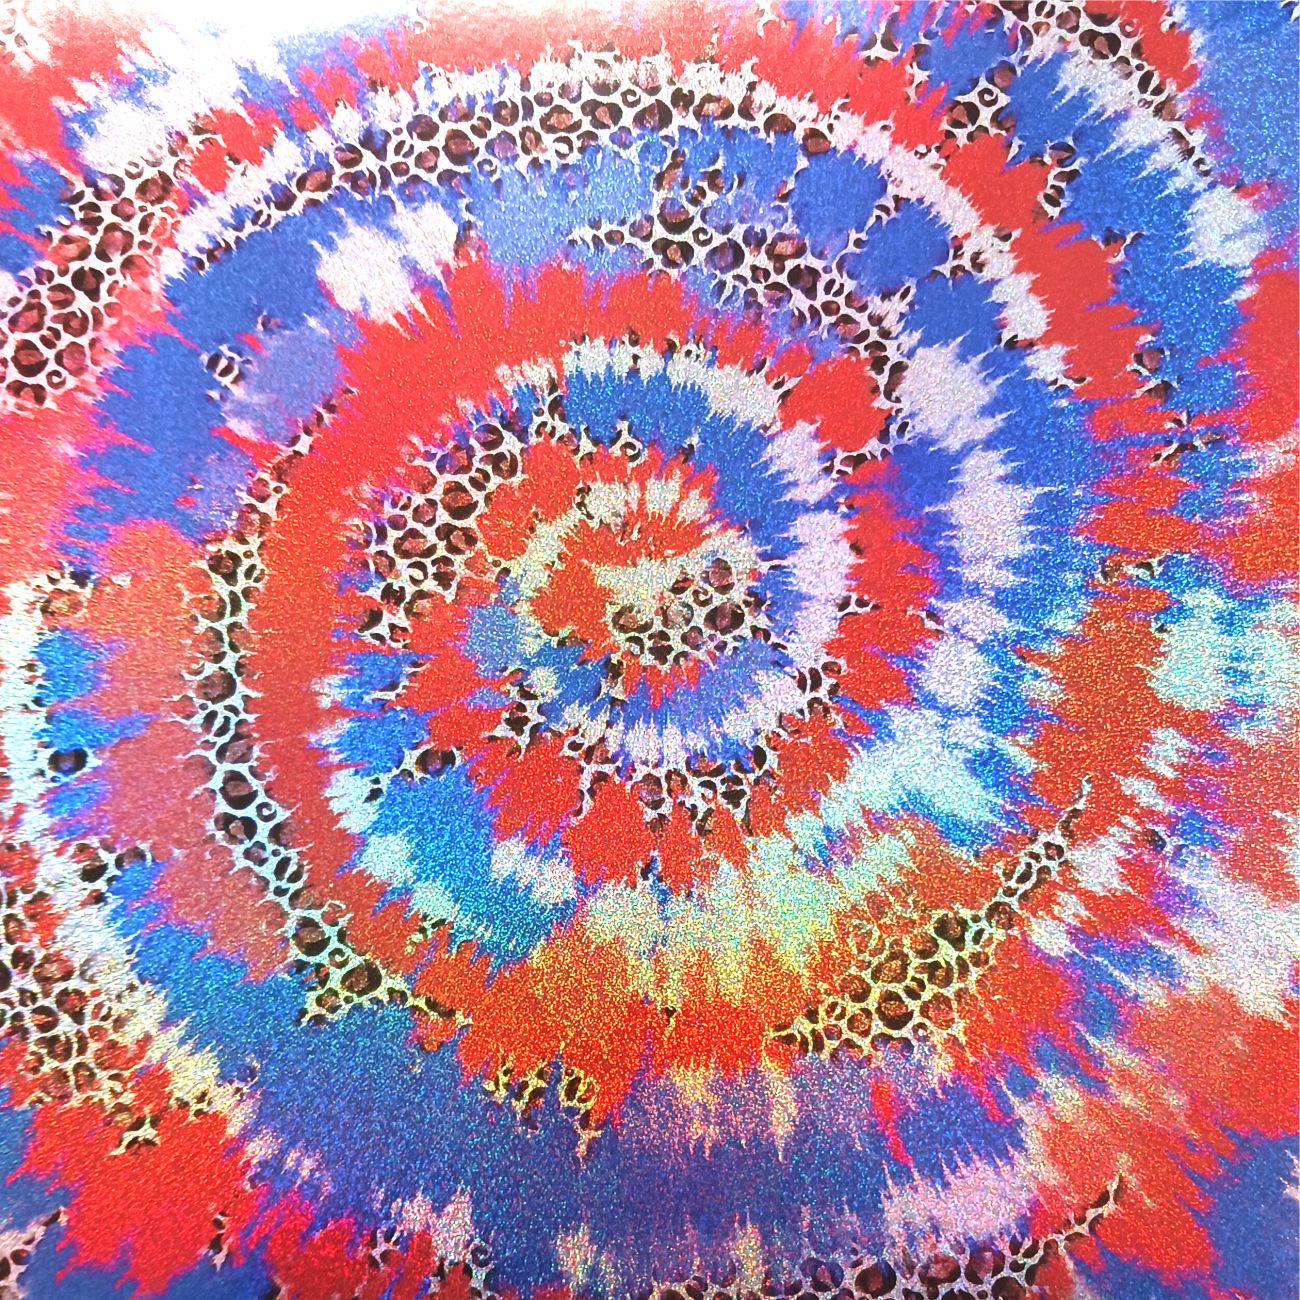 Small Holographic Red White Blue Tie Dye With Leopard - Adhesive Vinyl 12x12 Sheet - Limited Edition Print